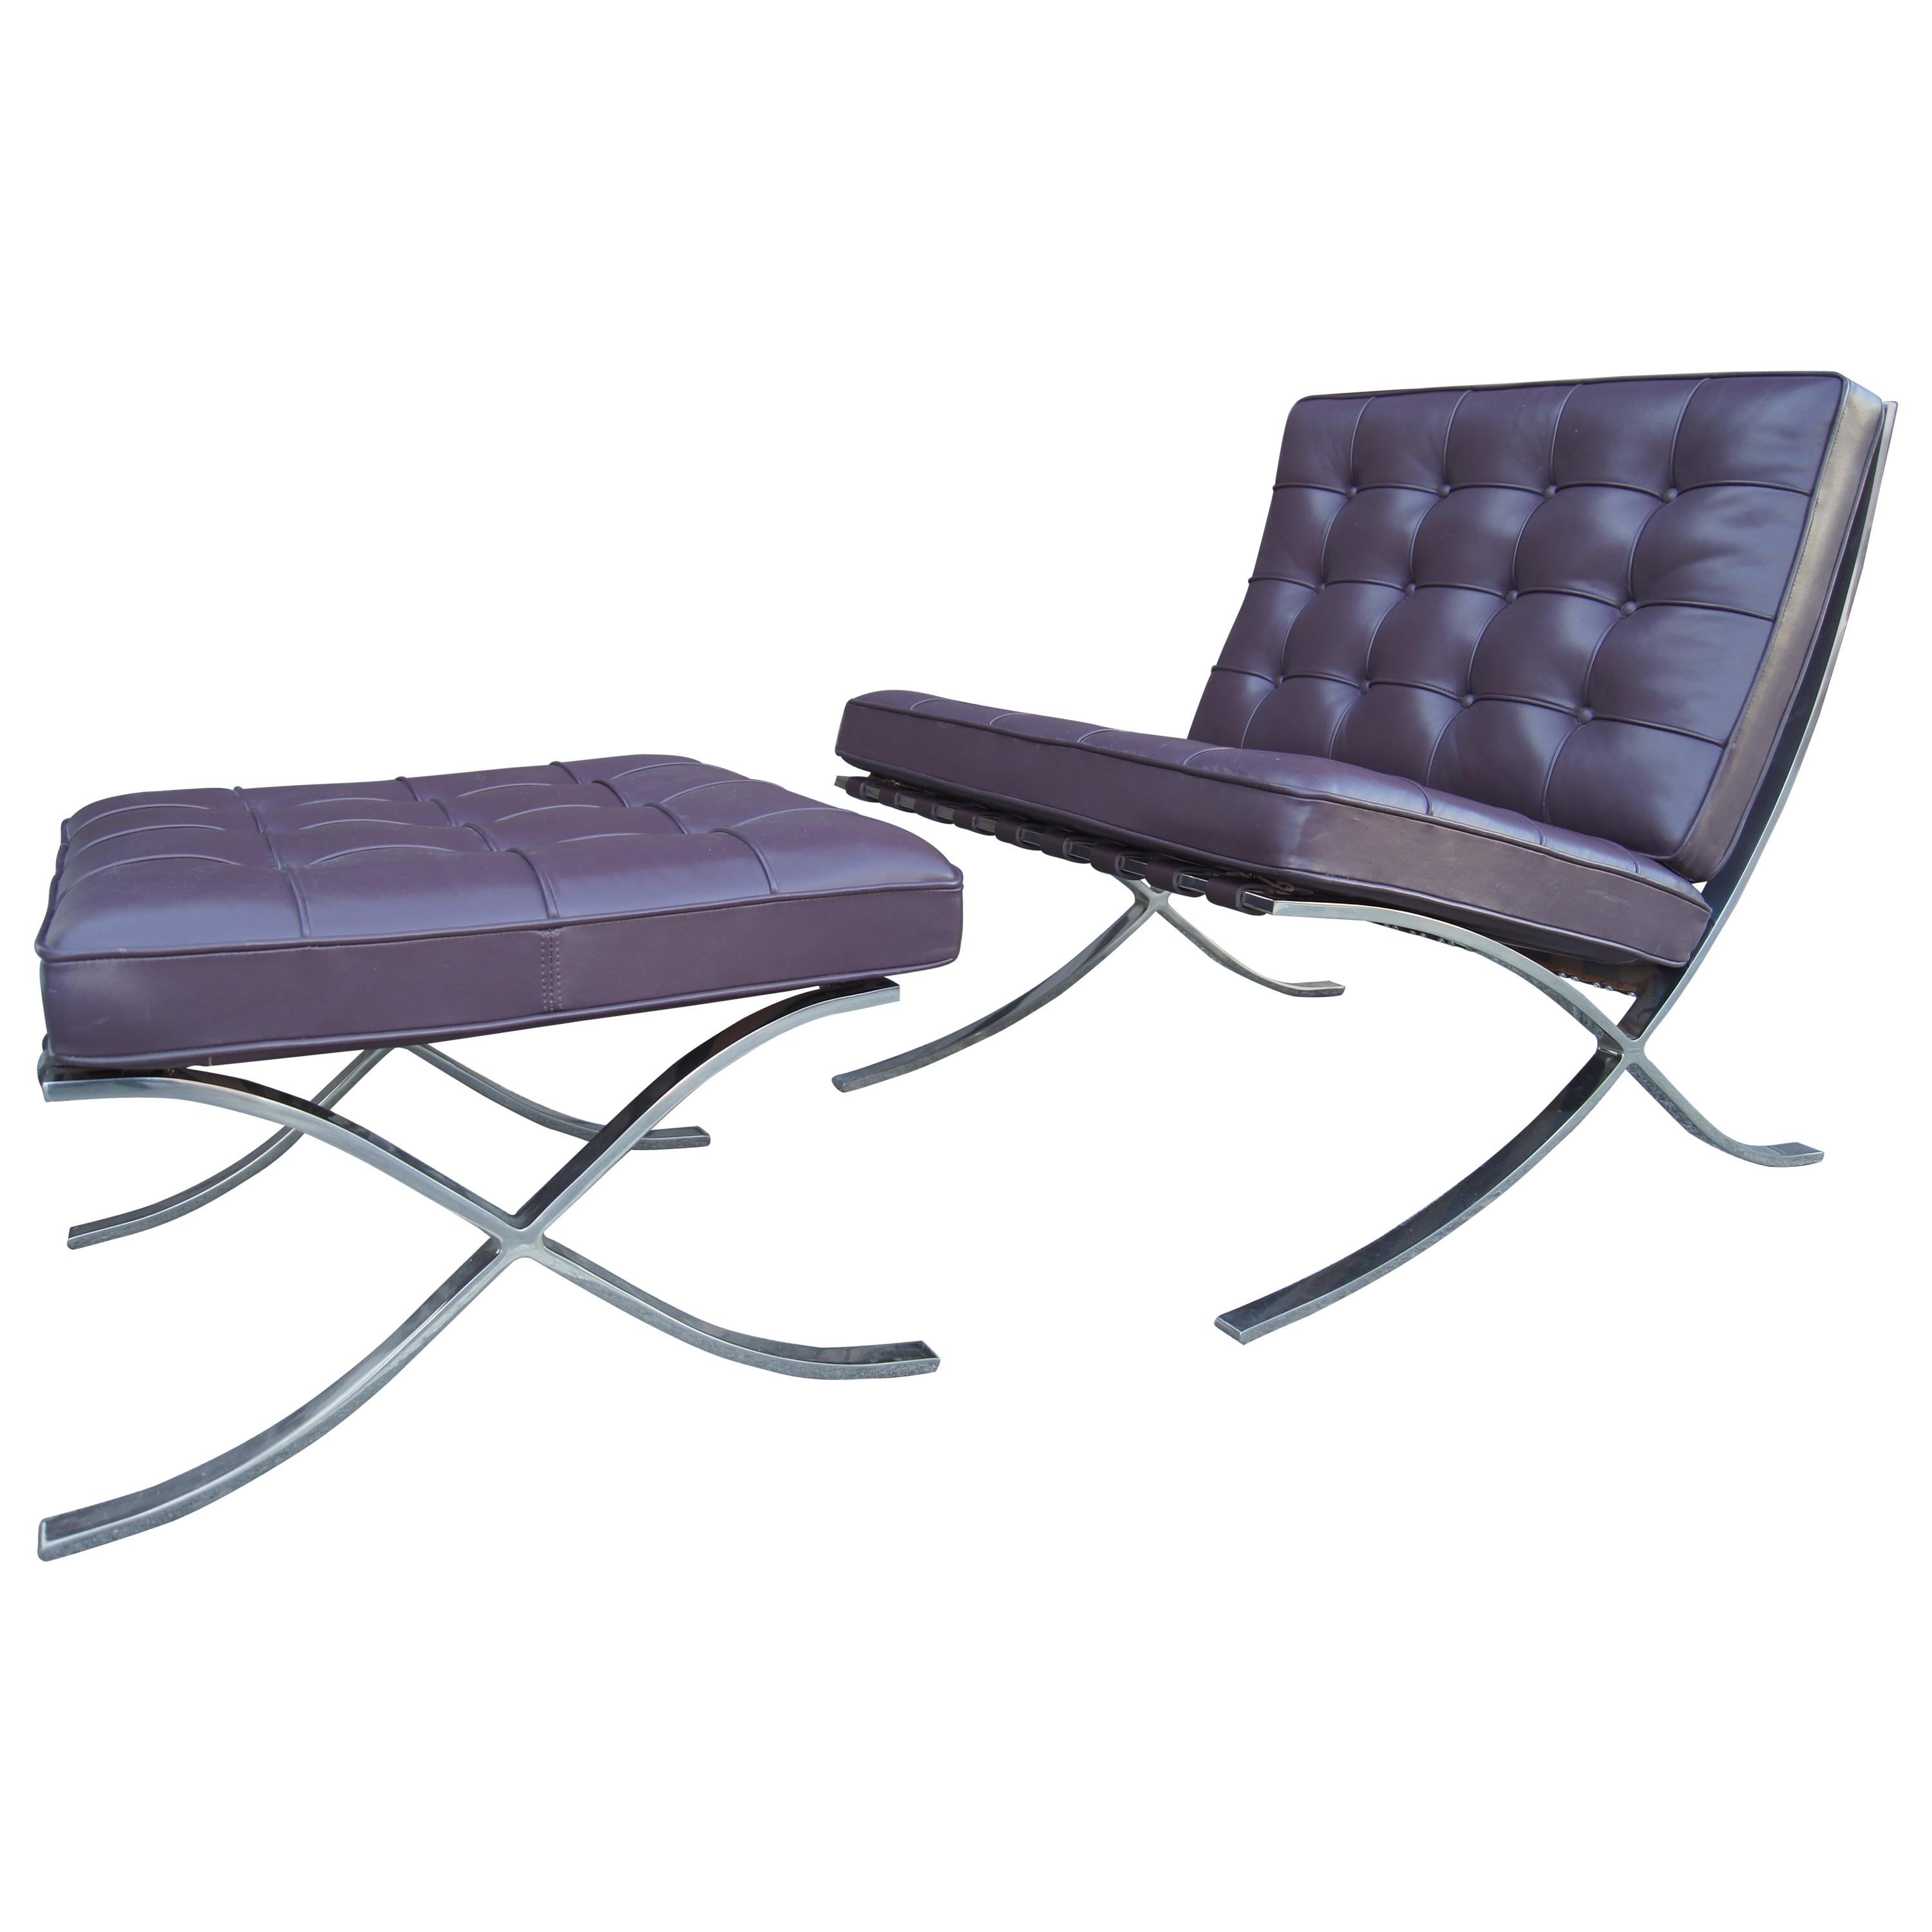 Eggplant Leather Barcelona Chair and Ottoman by Mies Van Der Rohe for Knoll